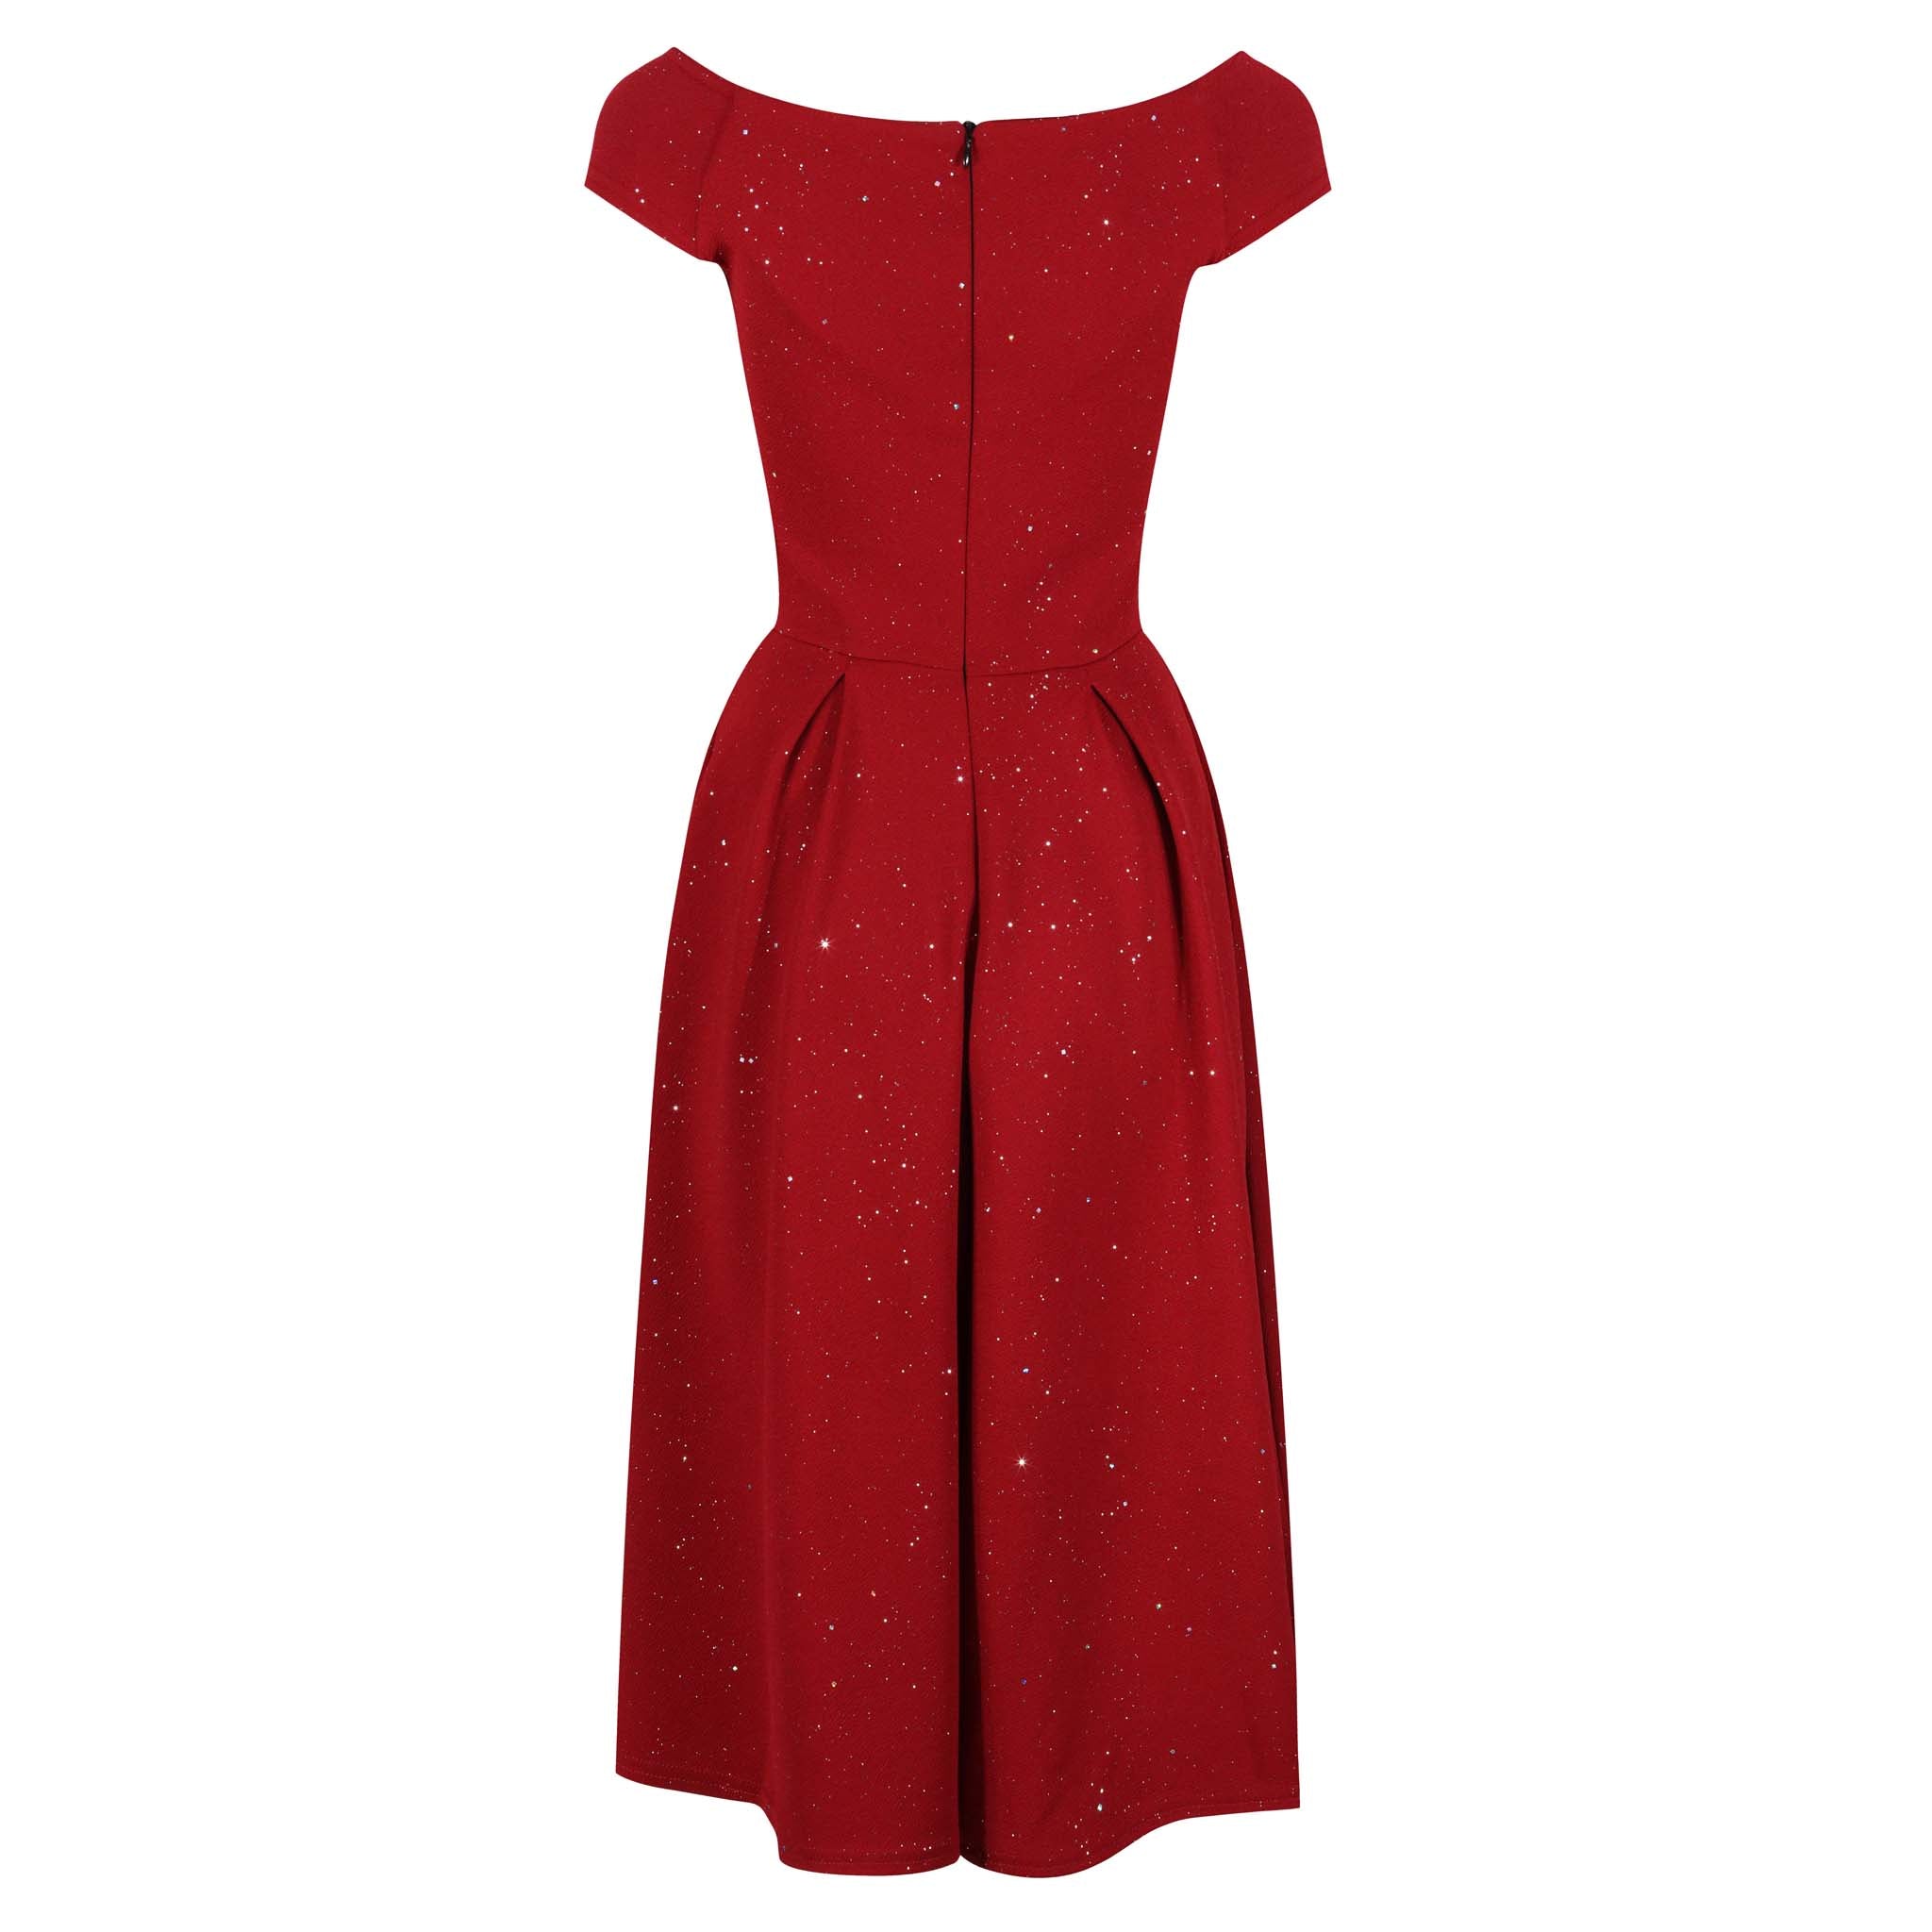 Wine Red Sparkly Glitter Crossover Bust Bardot Style 50s Swing Dress